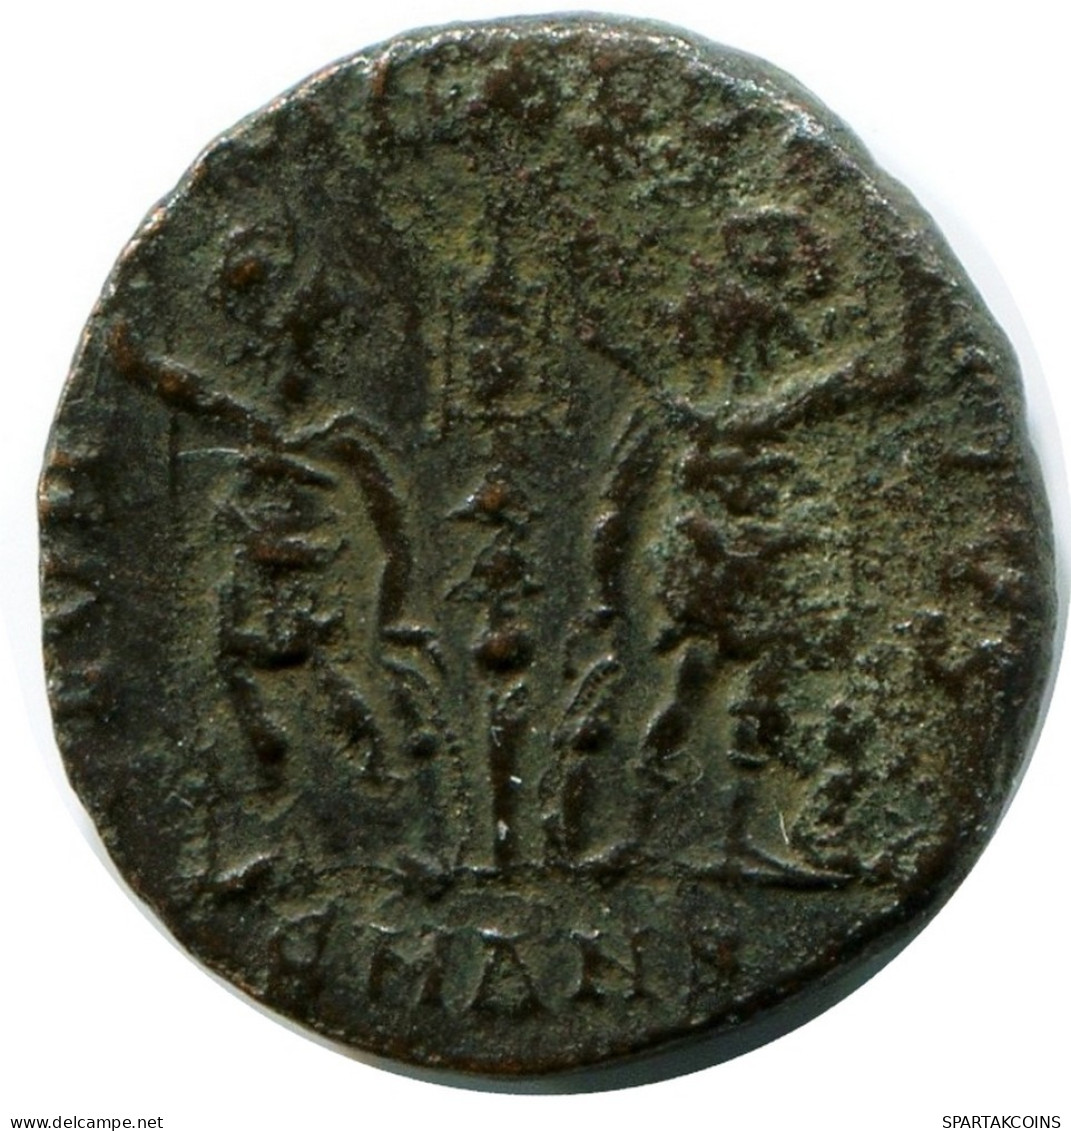 ROMAN Moneda MINTED IN ANTIOCH FROM THE ROYAL ONTARIO MUSEUM #ANC11283.14.E.A - El Impero Christiano (307 / 363)